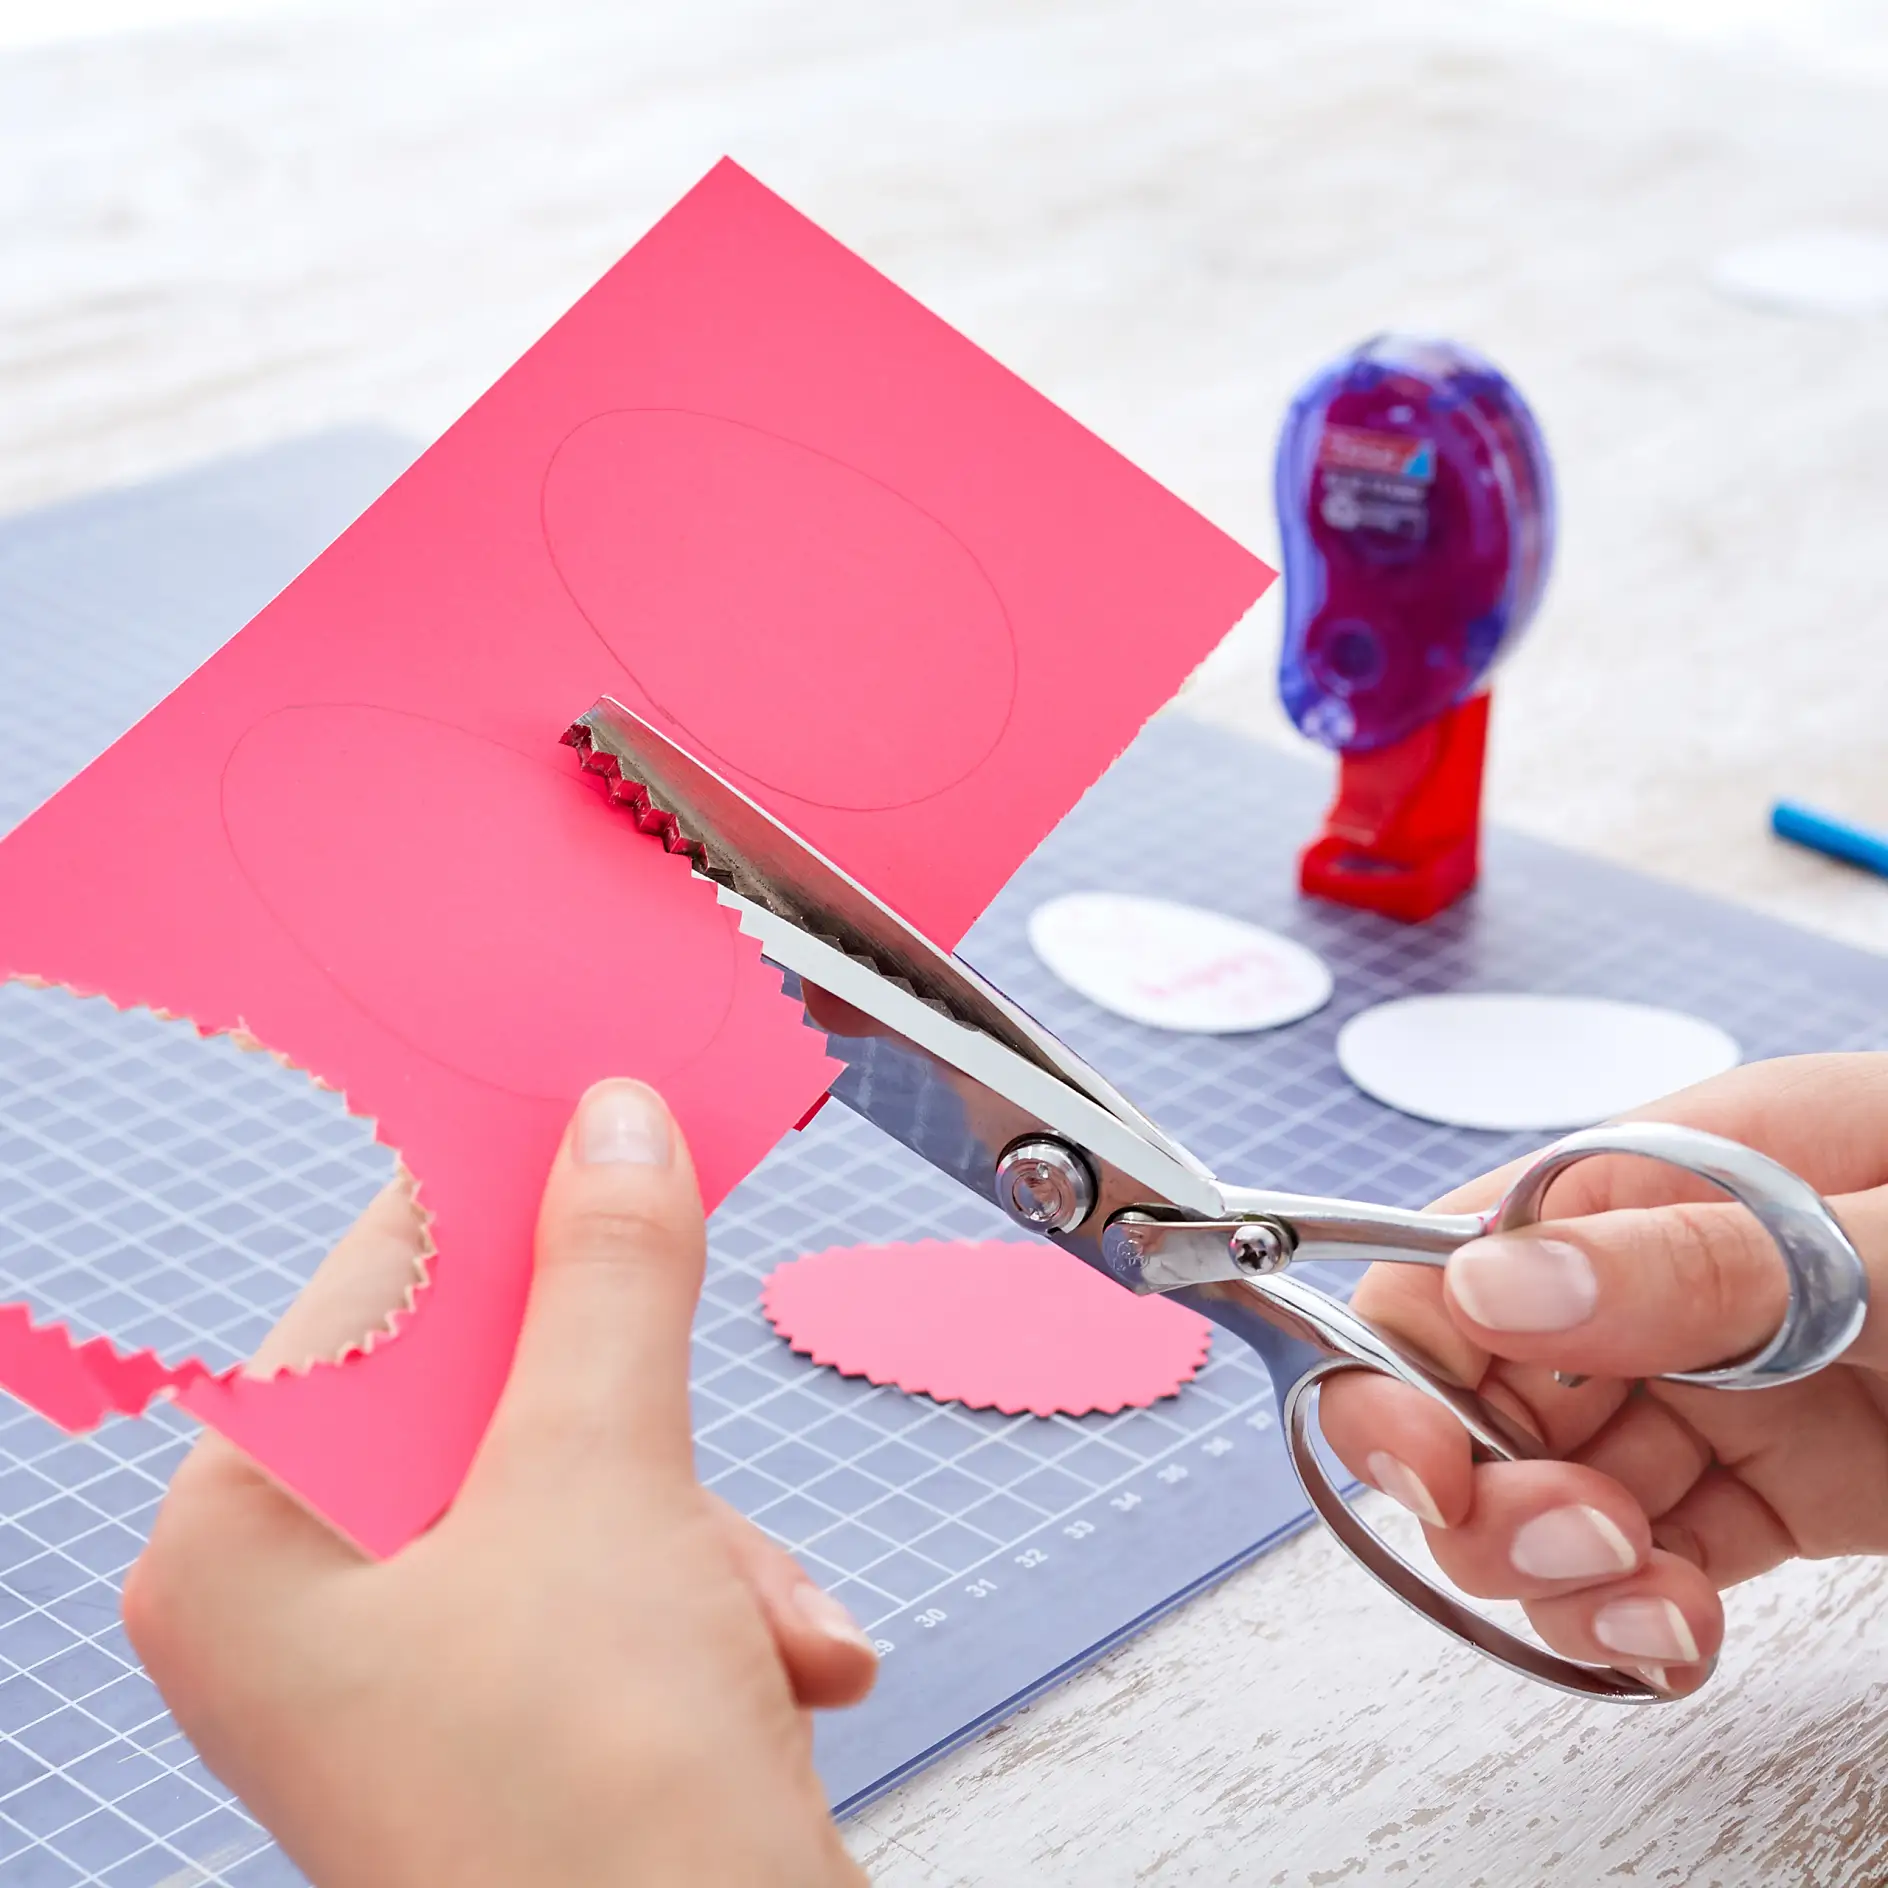 Transfer the template "EGG" to the cardboard using a pencil and cut it out with the pinking shears.